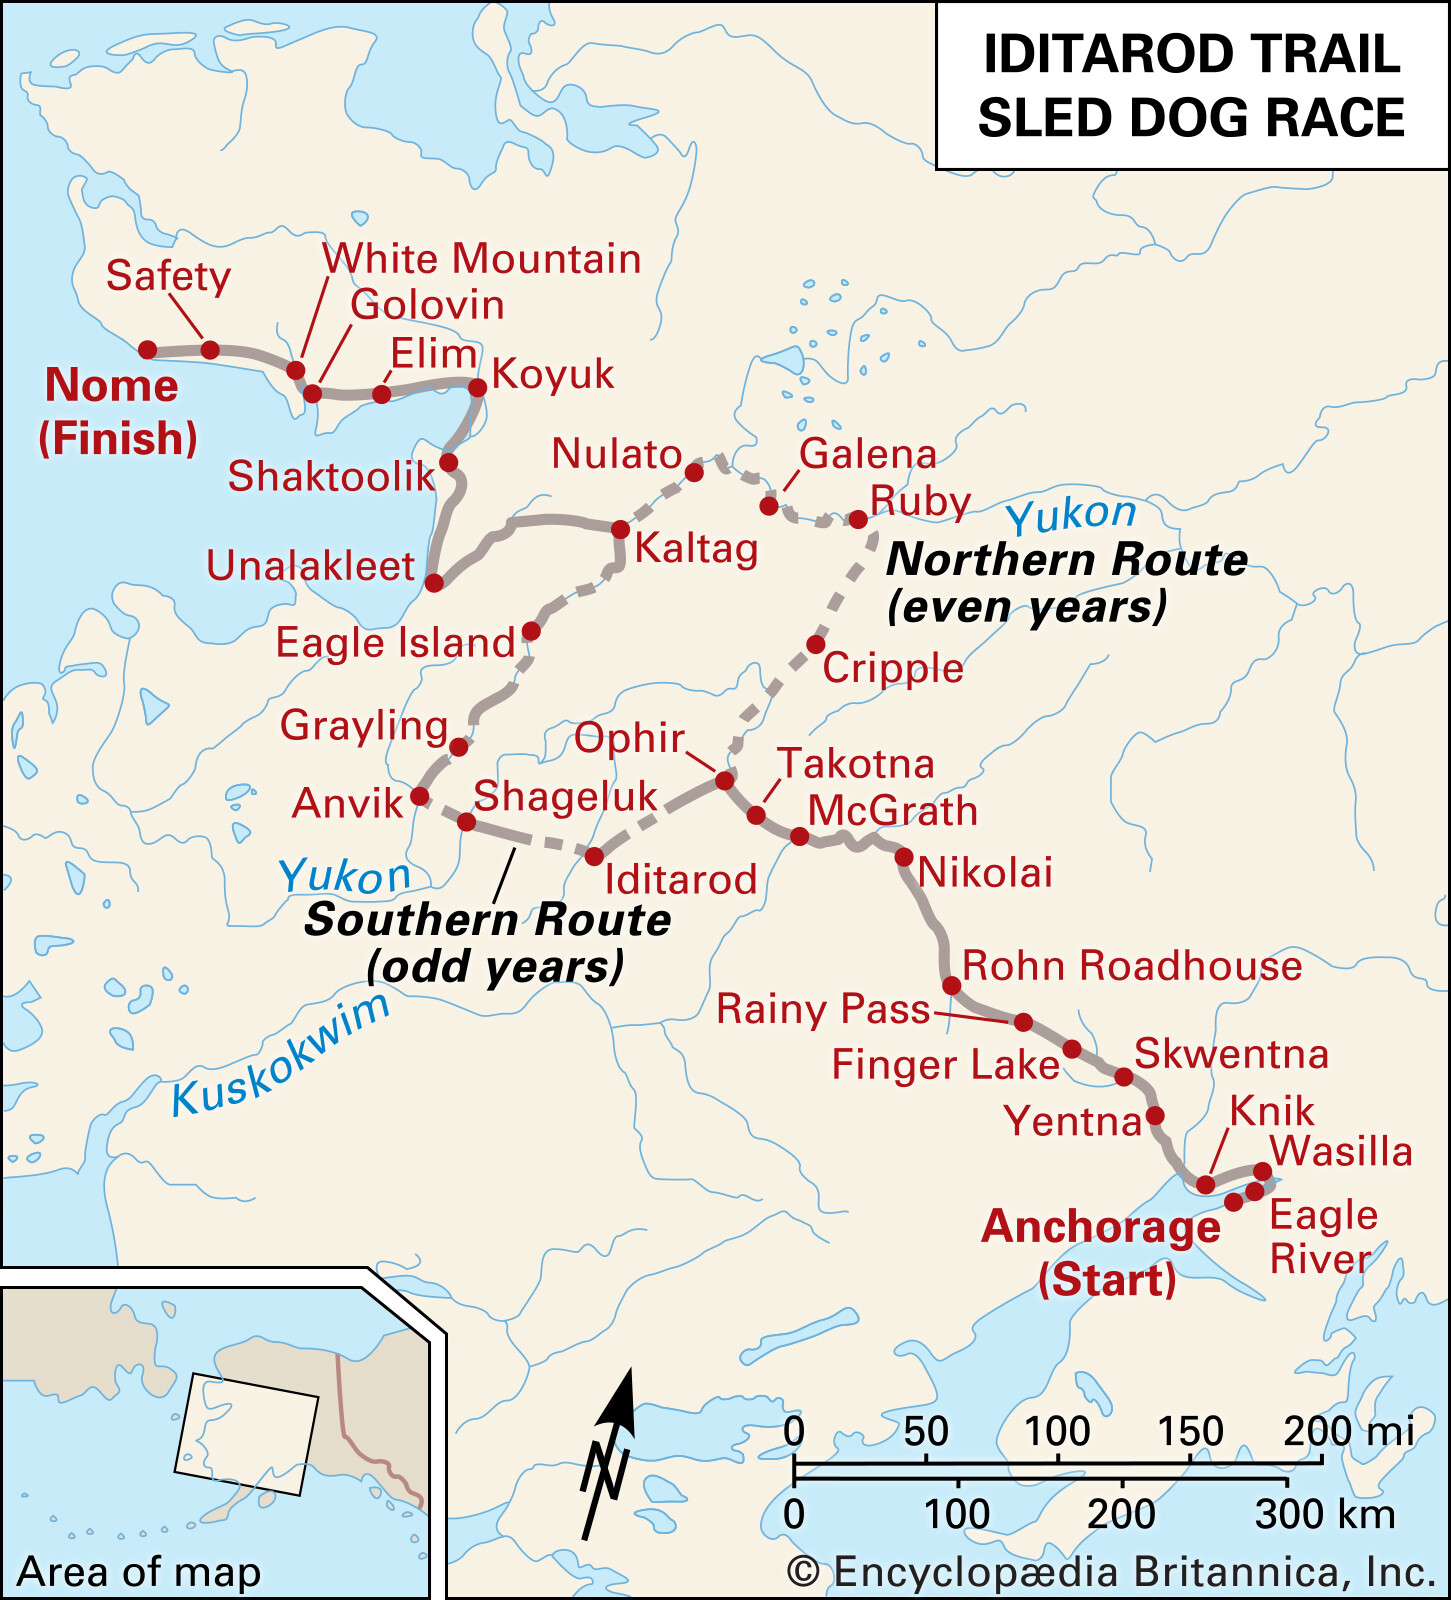 how many miles long is the iditarod?